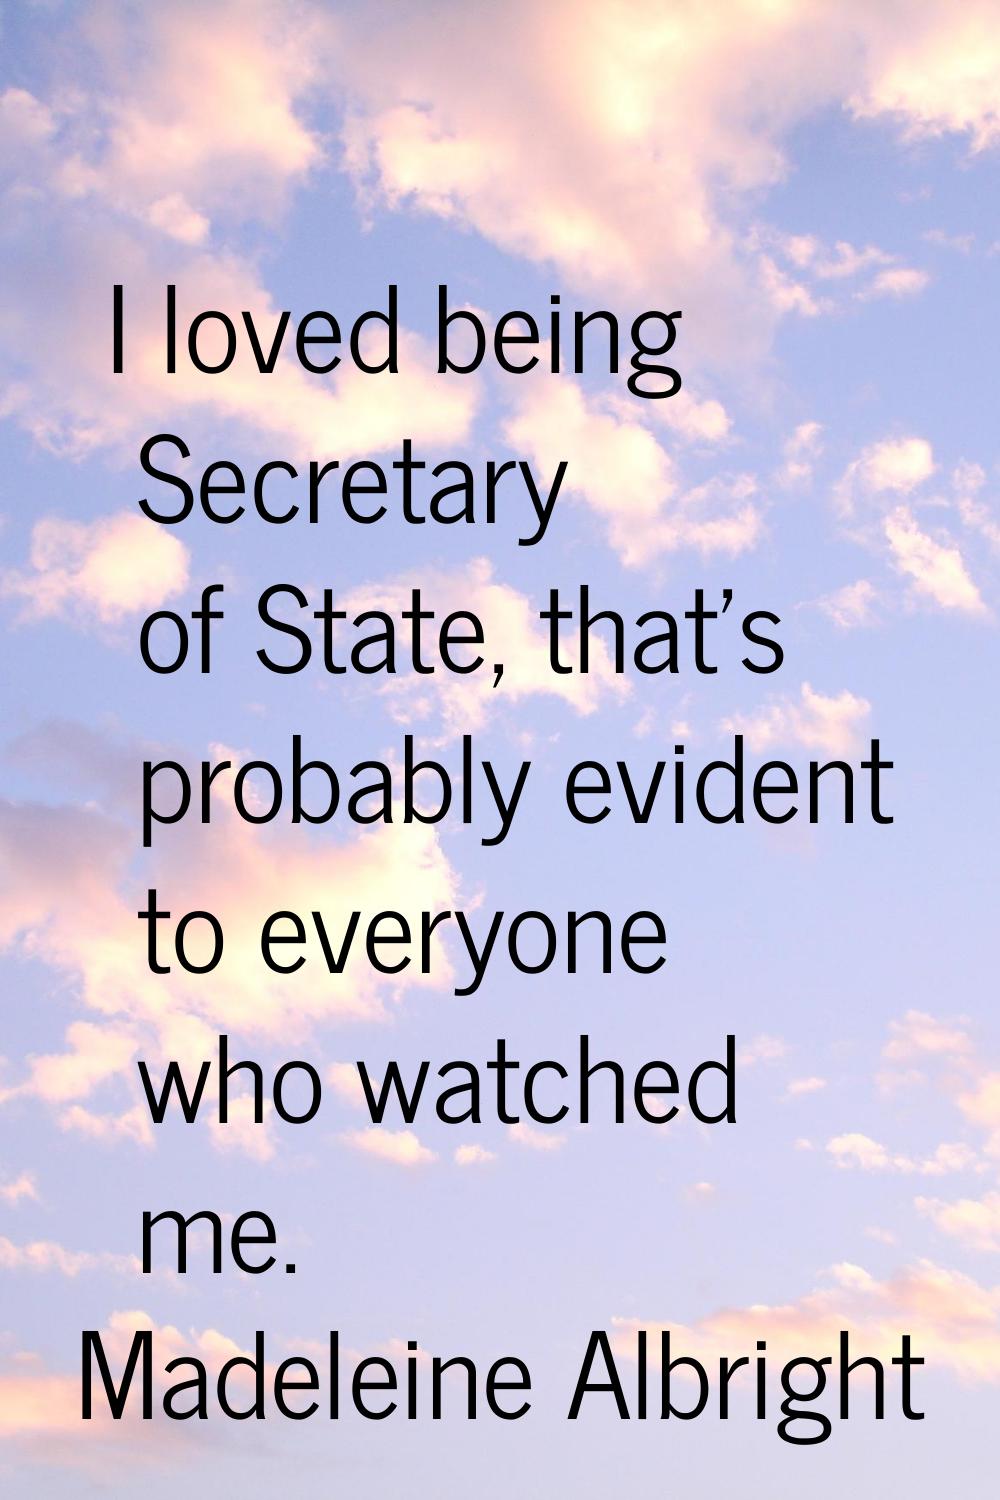 I loved being Secretary of State, that's probably evident to everyone who watched me.